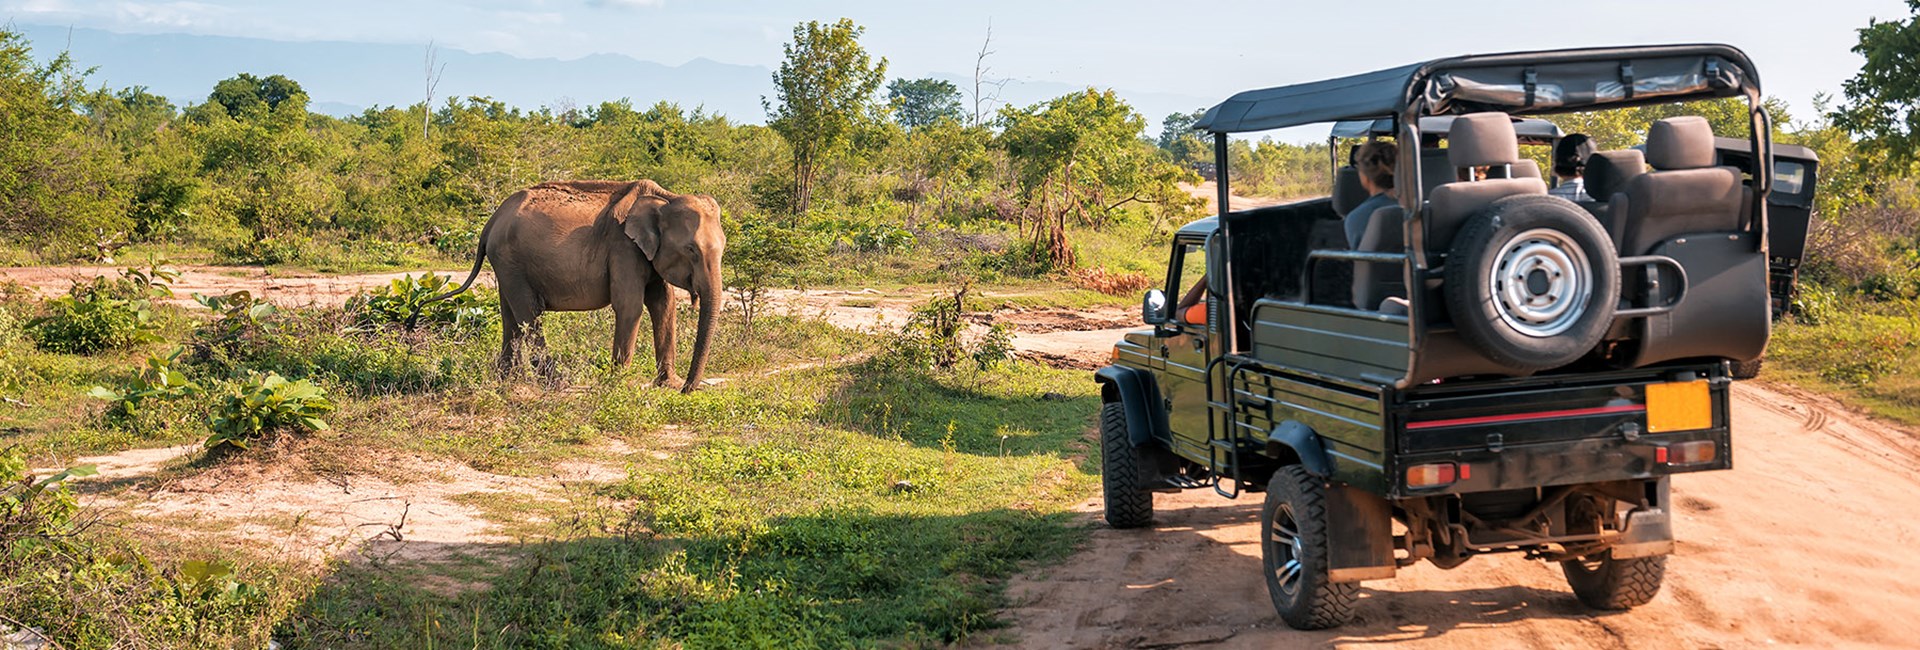 Safari jeep next to a small elephant in a grassy field